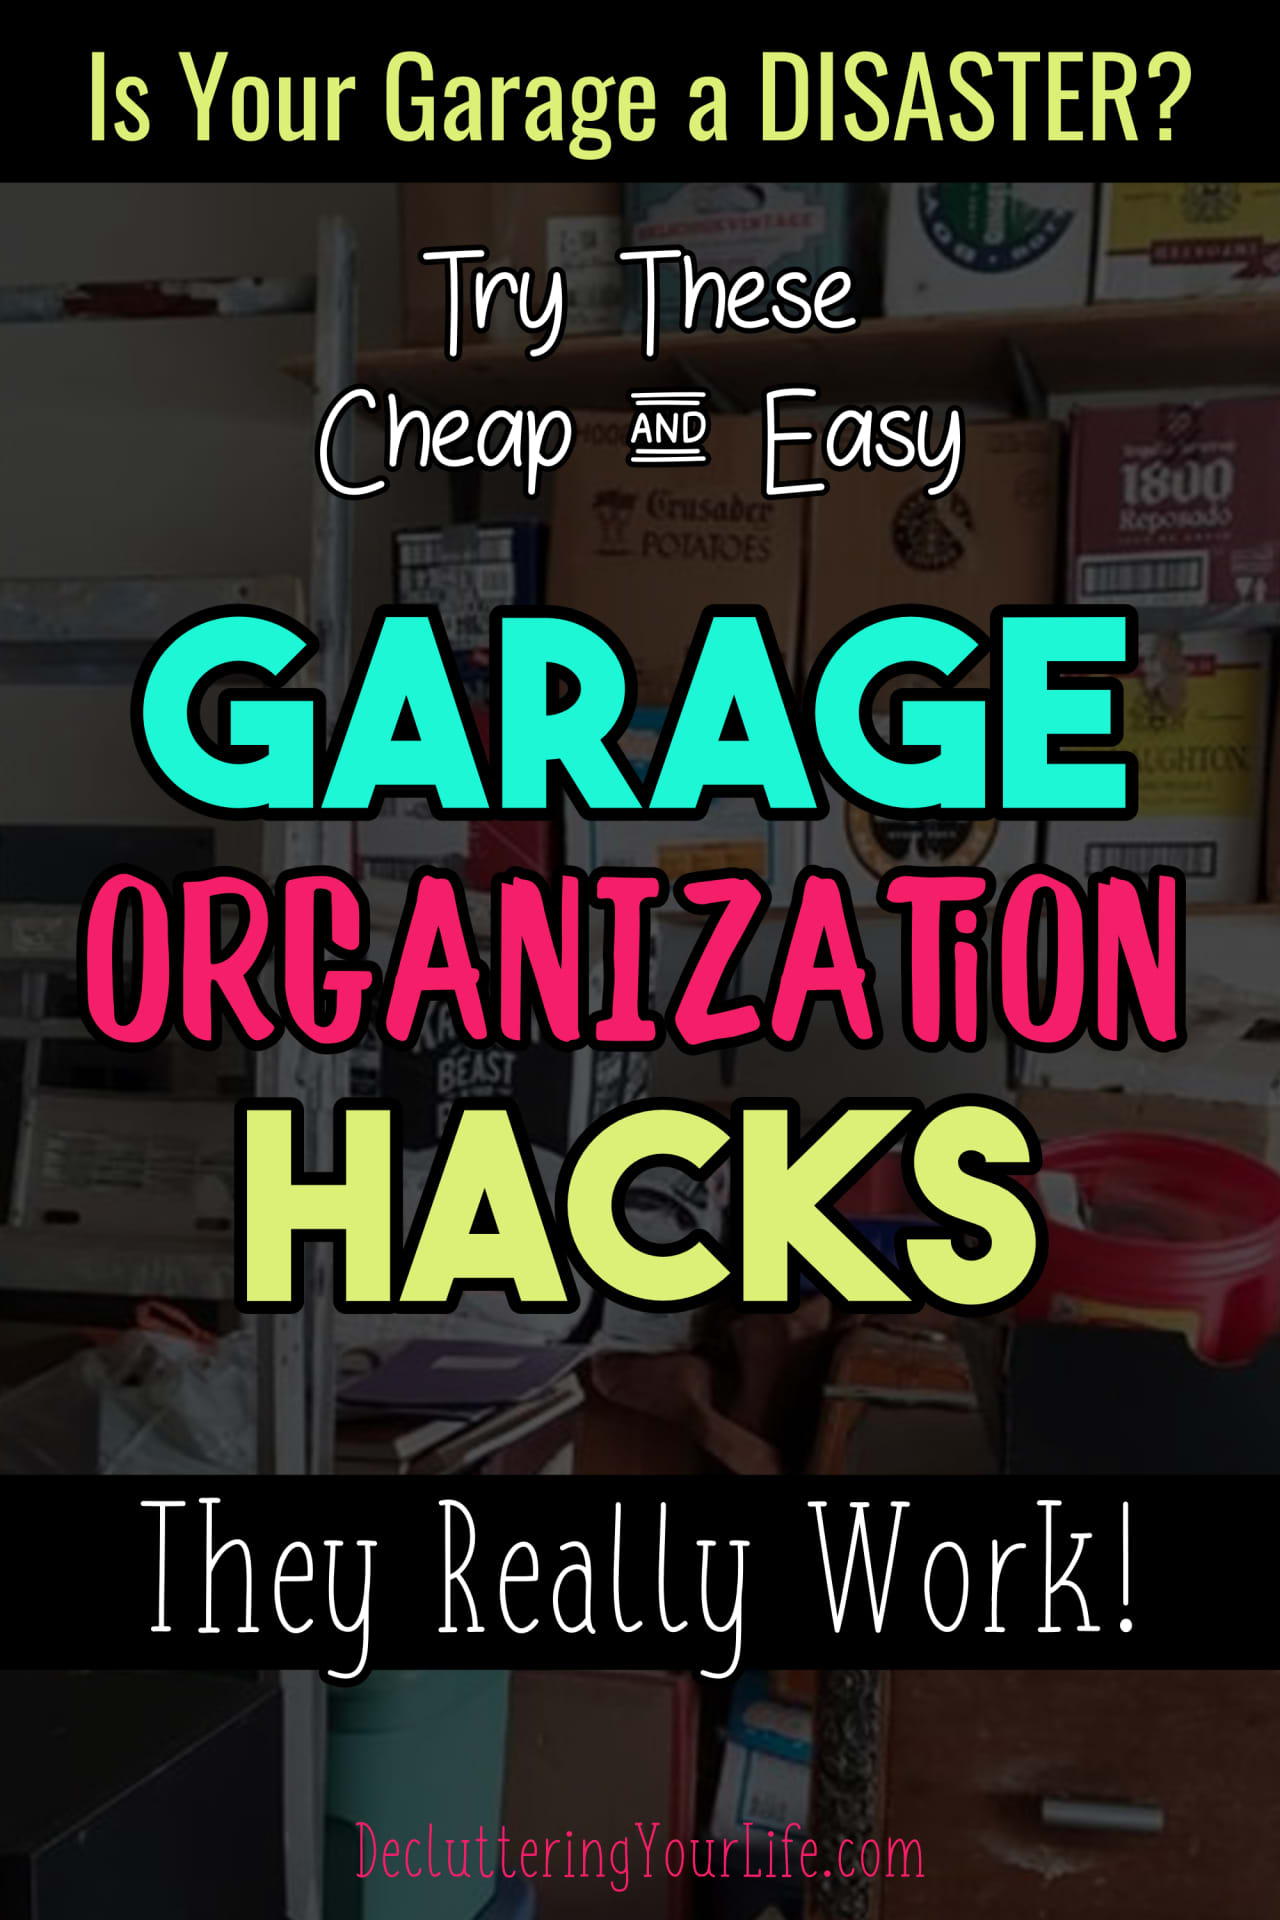 Garage storage and organization hacks - cheap and easy ways to organize your garage on a budget.  Get organized and STAY organized in your garage by decluttering your garage clutter.  These organizing ideas really work!